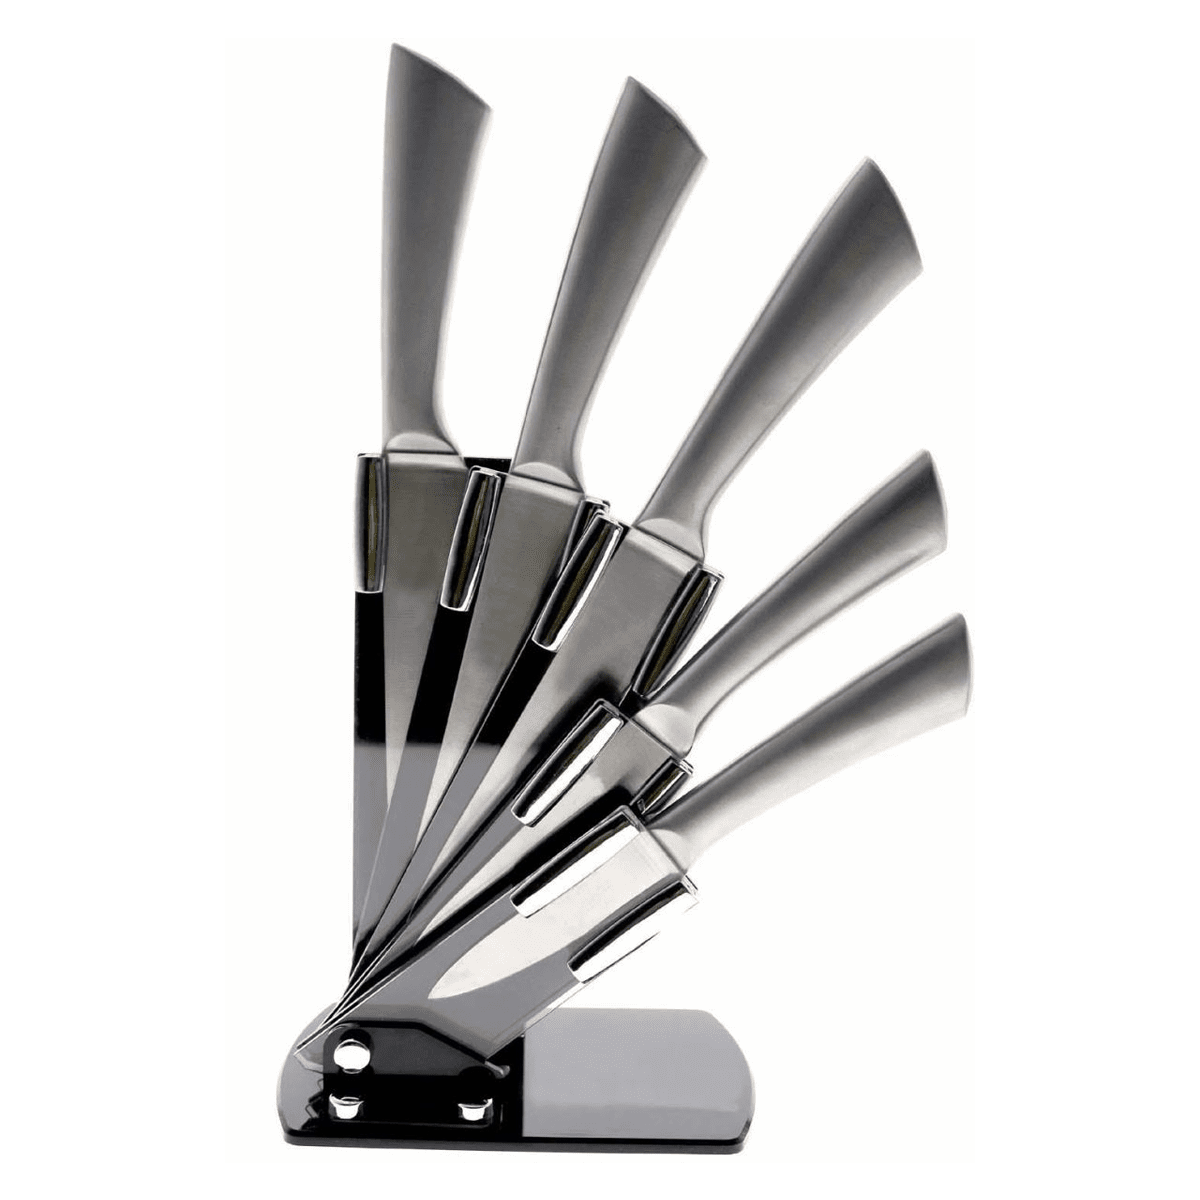 6 Pcs Stainless Steel Knives Set with Stand - SnapZapp